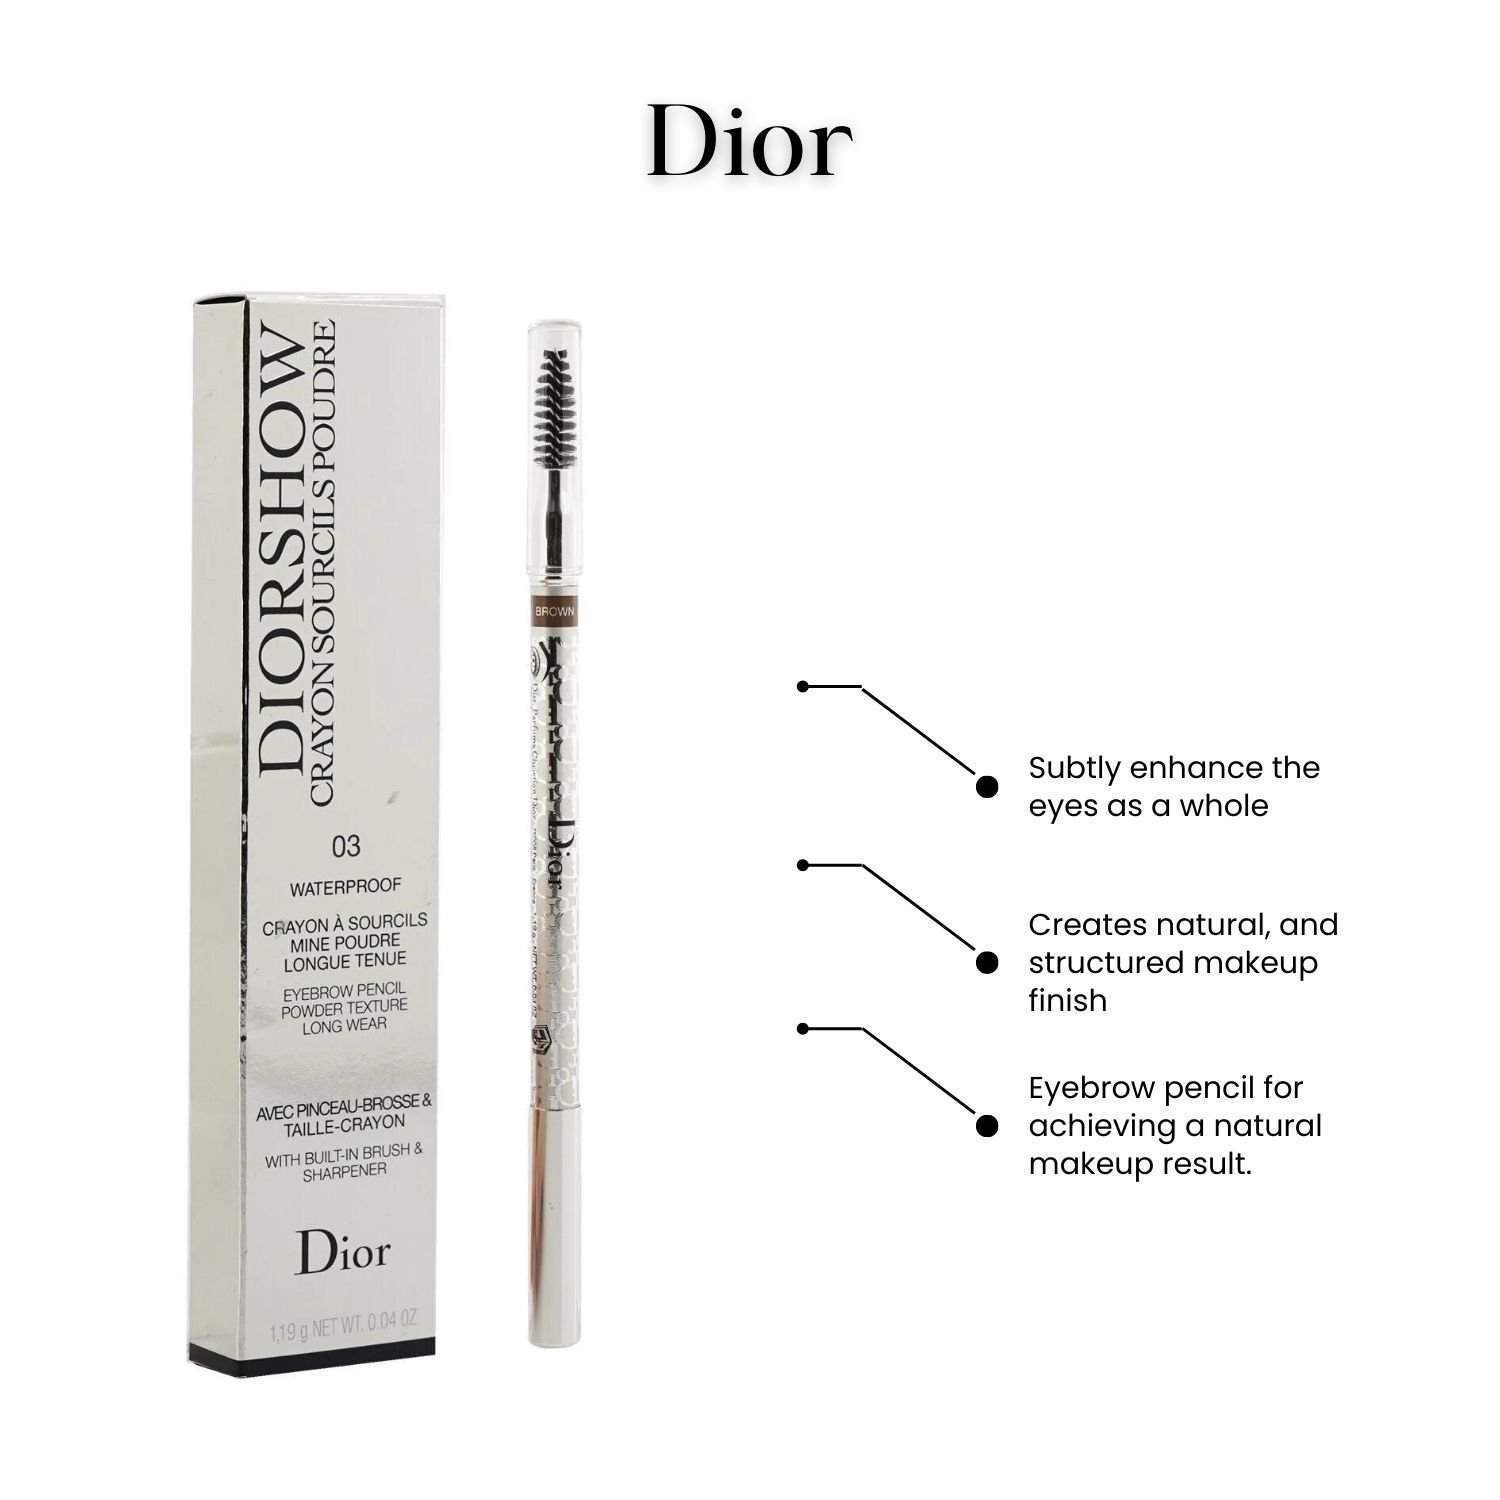 Diorshow Waterproof Crayon Sourcils Poudre - # 03 Brown - 1.19g/0.04oz - image 5 of 5